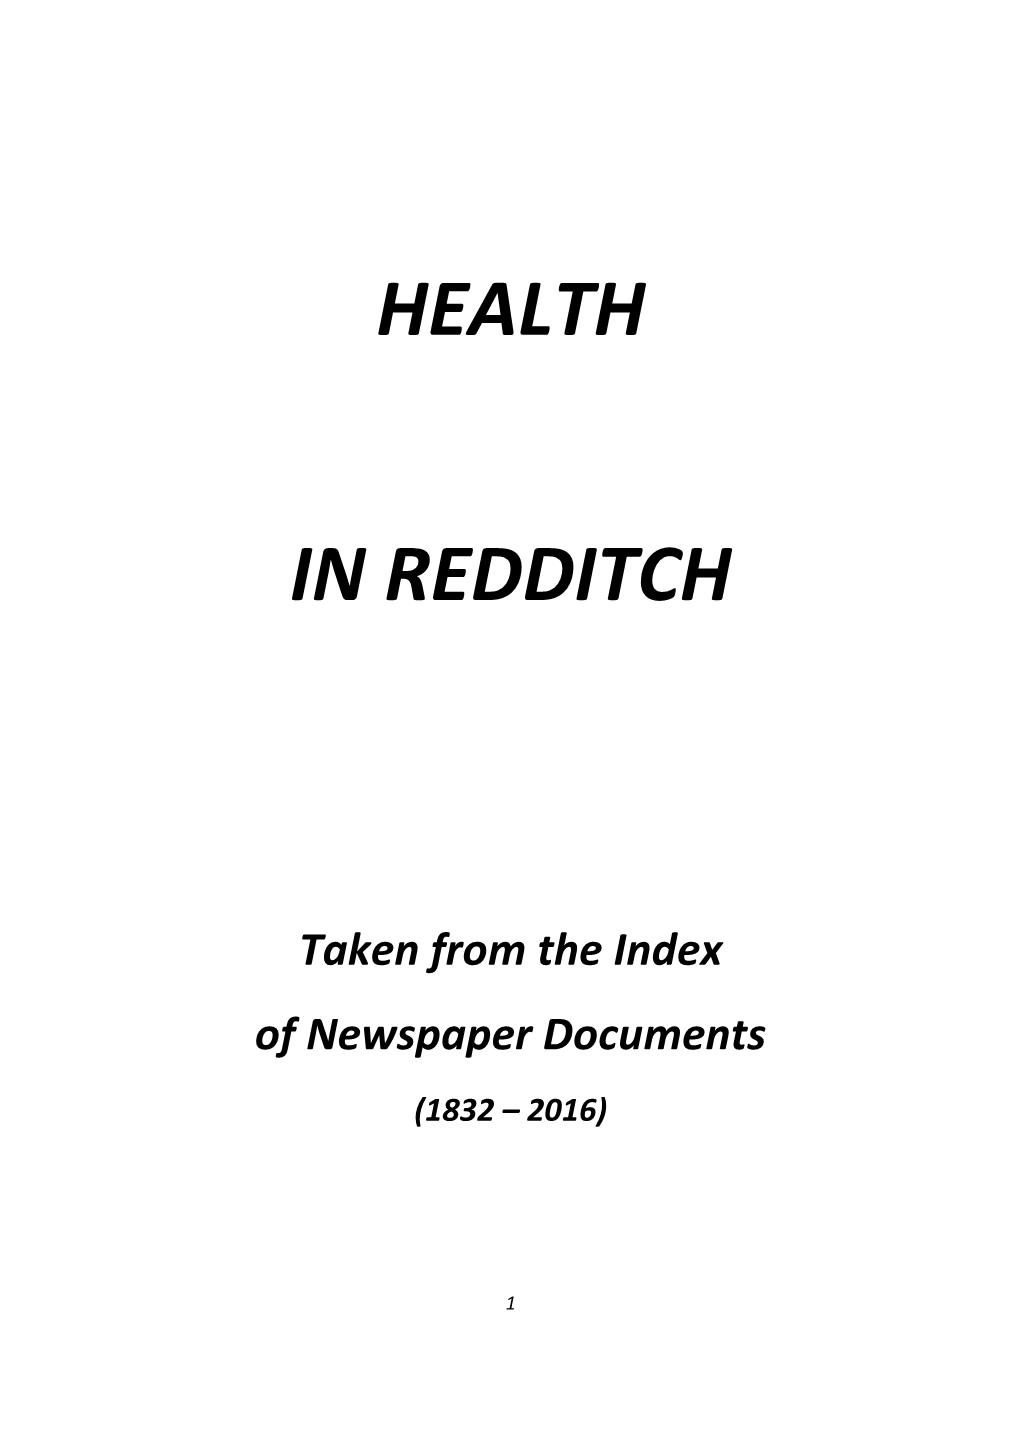 Health in Redditch Through the Years 1832 – 2016